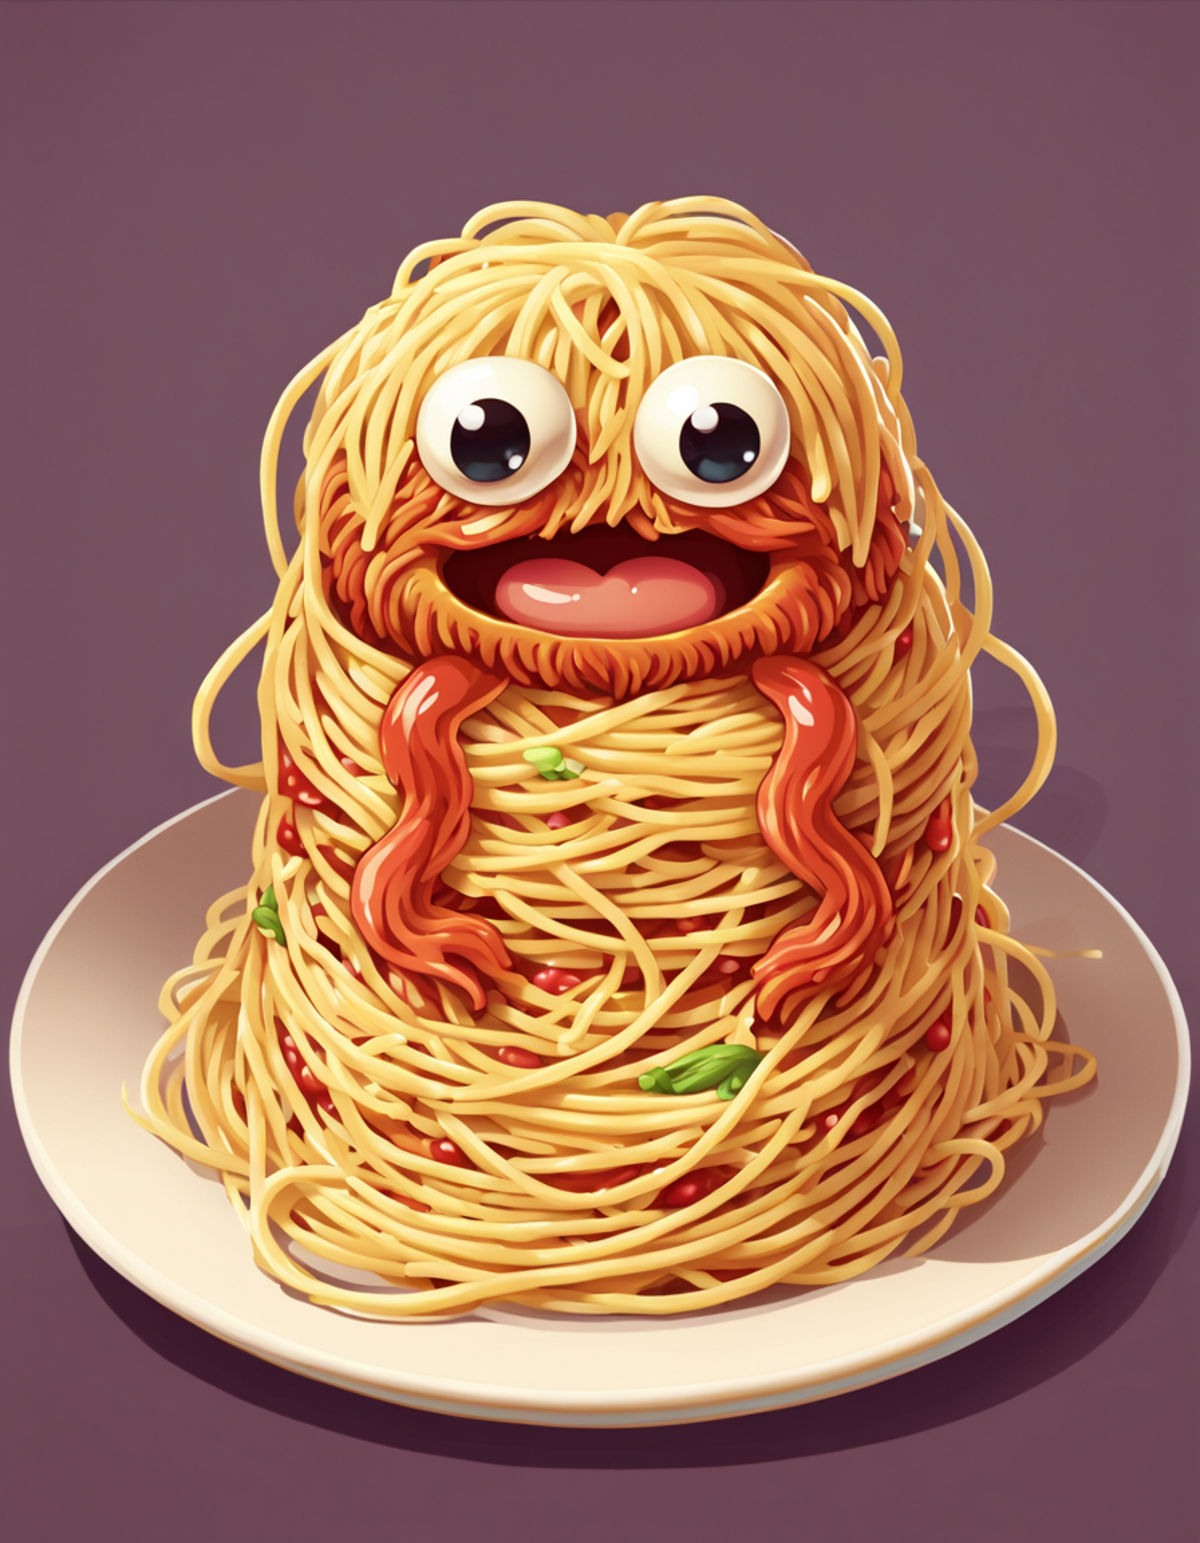 A plate of spaghetti with a face on top.